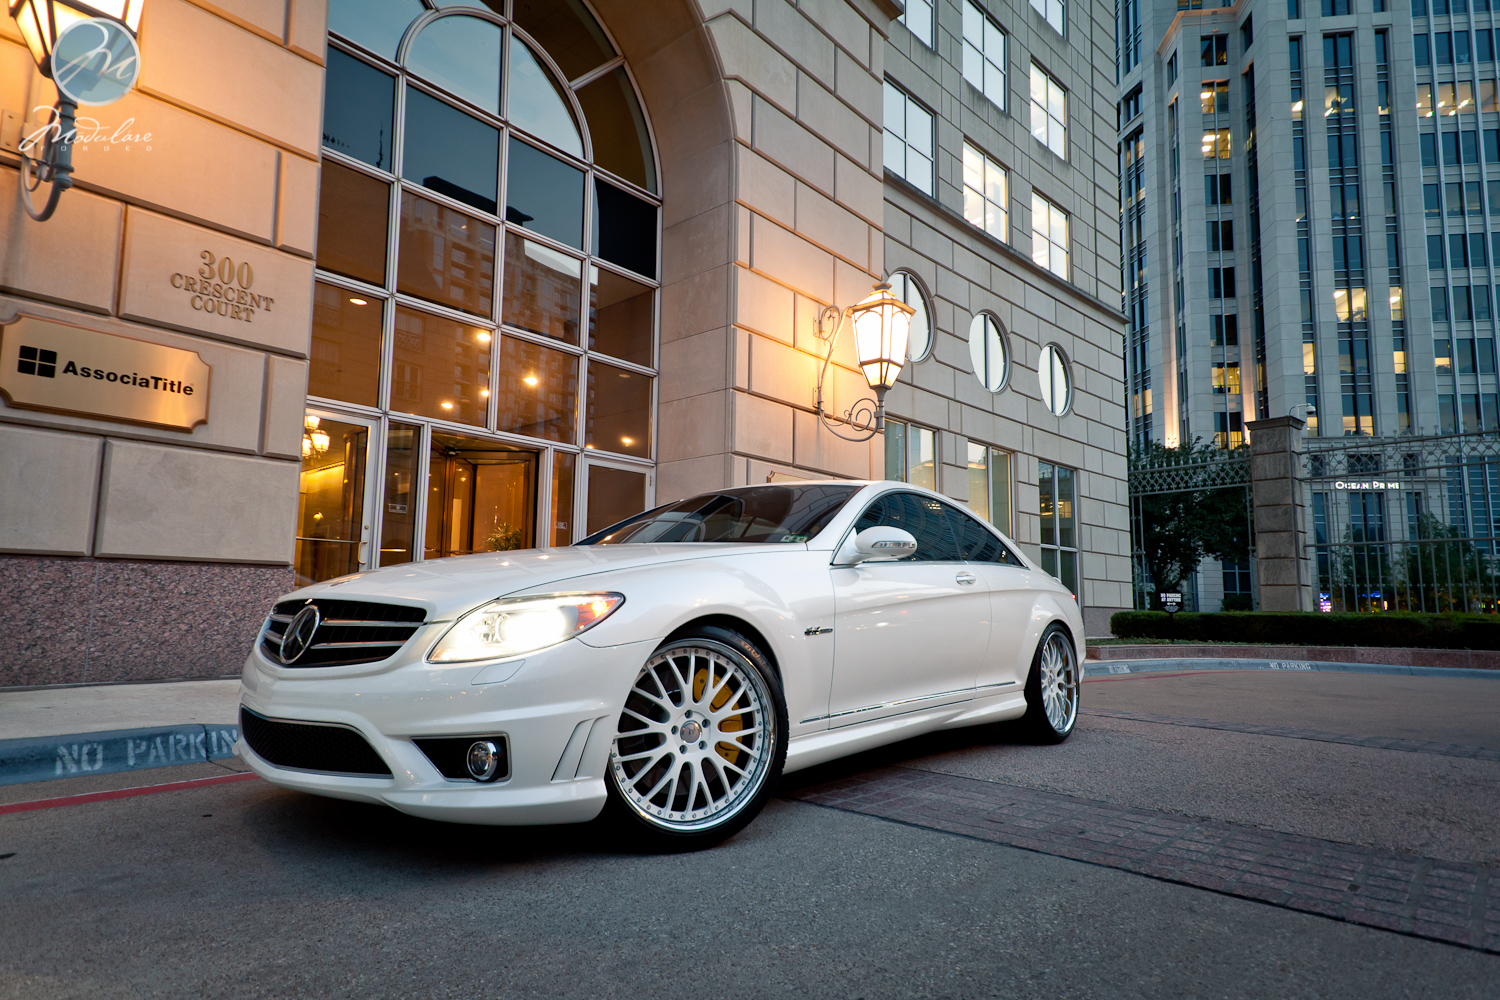 Professional Photo Shoot of 2009 CL63 MBWorldorg Forums